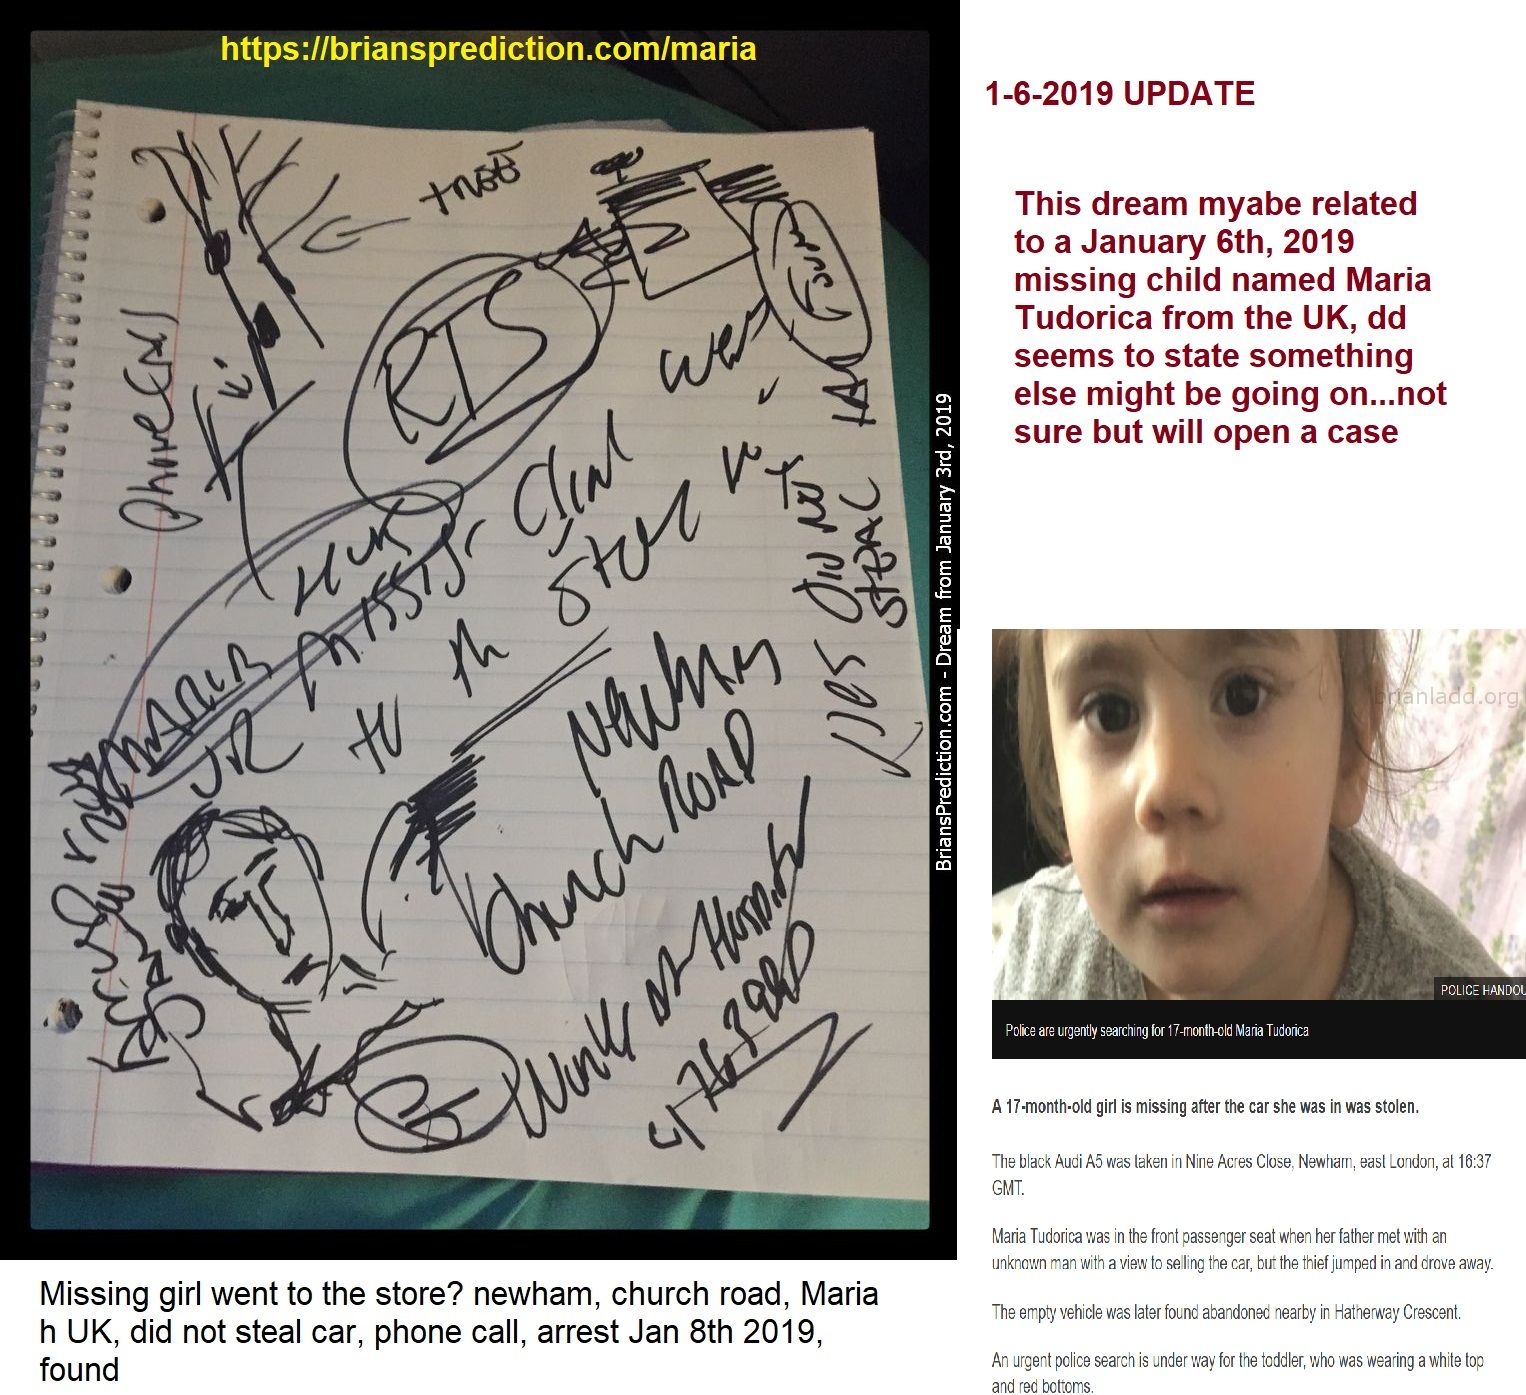 Maria Tudorica Missing Child Uk Jan 6 2019 Psychic Brian Ladd - This Dream Maybe Related To A January 6th, 2019 Missing ...
This Dream Maybe Related To A January 6th, 2019 Missing Child Named Maria Tudorica From The Uk, Dd Seems To State Something Else Might Be Going On  Not Sure But Will Open A Case.  More At   https://briansprediction.com/Maria  Dd Says  Missing Girl Went To The Store? Newham, Church Road, Maria H Uk, Did Not Steal Car, Phone Call, Arrest Jan 8th 2019, Found  News Report  Girl Missing After Dad'S Car Stolen In Newham  Police Are Urgently Searching For 17-Month-Old Maria Tudorica  A 17-Month-Old Girl Is Missing After The Car She Was In Was Stolen.  The Black Audi A5 Was Taken In Nine Acres Close, Newham, East London, At 16:37 Gmt.  Maria Tudorica Was In The Front Passenger Seat When Her Father Met With An Unknown Man With A View To Selling The Car, But The Thief Jumped In And Drove Away.  The Empty Vehicle Was Later Found Abandoned Nearby In Hatherway Crescent.  An Urgent Police Search Is Underway For The Toddler, Who Was Wearing A White Top And Red Bottoms.  Officers Say Maria Was Born In Romania But Lived In The Local Area.  Maria Was Wearing A White Top And Red Bottoms When She Was Taken  The Man Who Took The Car - Registration Number Fy58uaz - Is Described As Asian, Of Slim Build And Dressed In Black Clothing.  The Metropolitan Police Is Appealing For Information And Witnesses.  Missing Girl Went To The Store? Newham, Church Road, Maria H Uk, Did Not Steal Car, Phone Call, Arrest Jan 8th 2019, Found  Psychic Brian Ladd Uses His Visions, Dreams To Accurately Predict Future Events. His On-Line Dream Diary Contains Over 8,000 Documented Dreams, Lucid Dreams And Remote Viewing Cases. To Date, Over 3,000 Predictions Have Come True, With More And More Every Day. Brian Has Personally Worked Hundred Missing Person Cases Since 2006 With A Success Rate Of Around 45%. Brian Served 12 Active Years In The Us Army And Then Joined The Army Reserves. Brian Was Diagnosed With Schizoaffective Disorder In 2011, And Some Say This 'illness' Maybe The Reason Why So Many Of His Dreams Have Come True.
